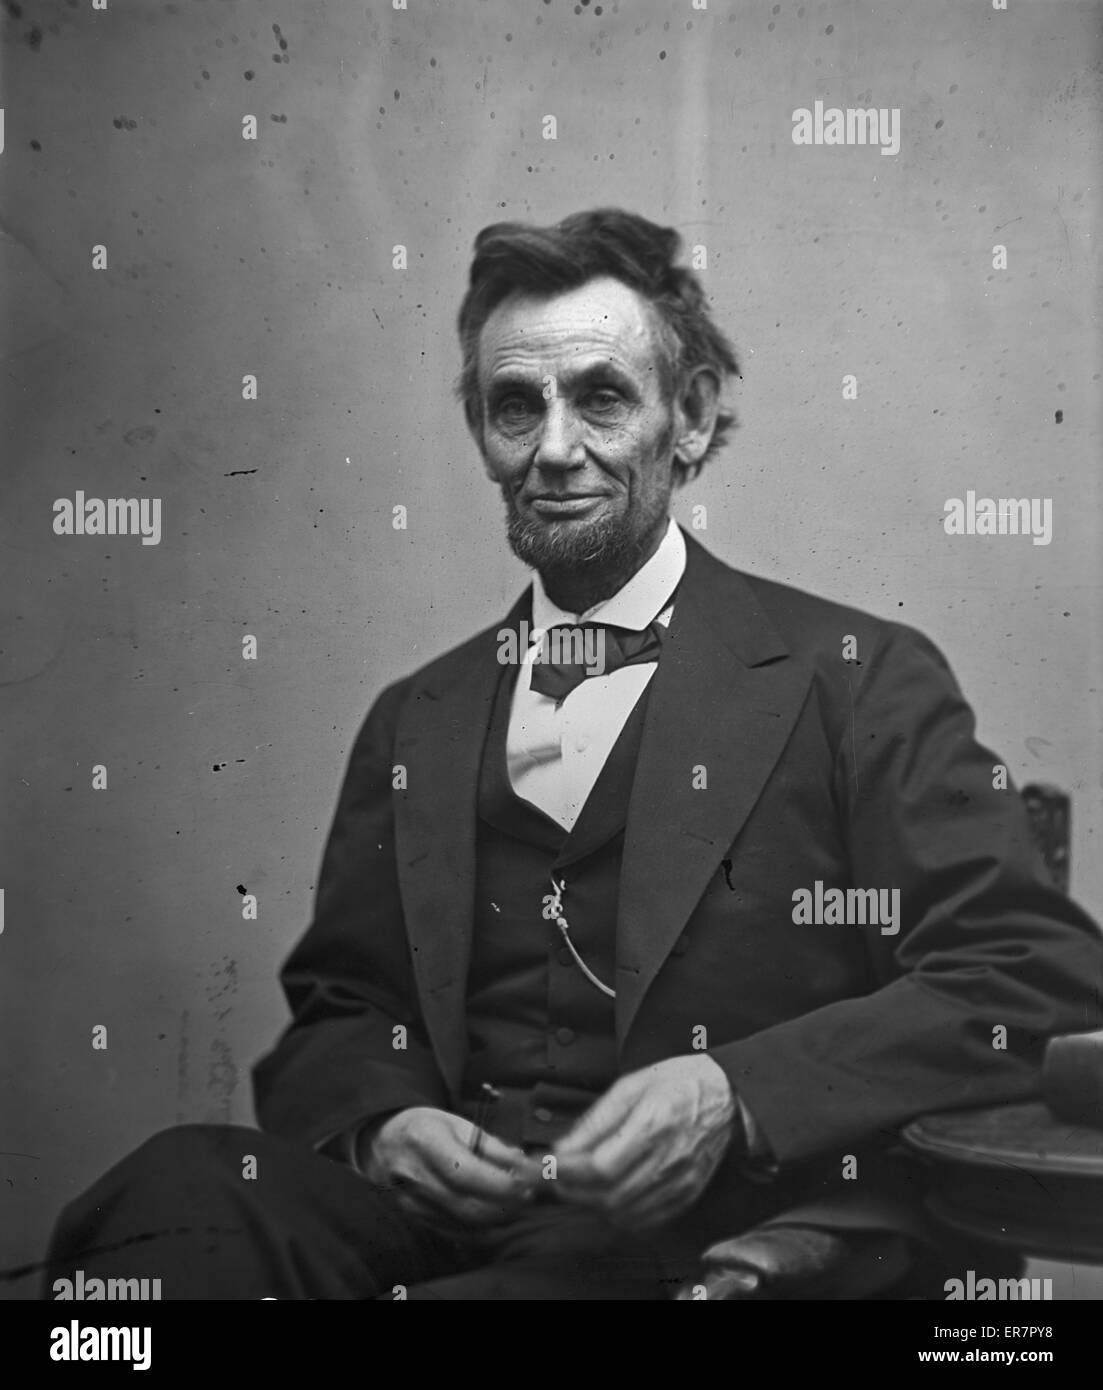 Abraham Lincoln, three-quarter length portrait, seated and h Stock Photo